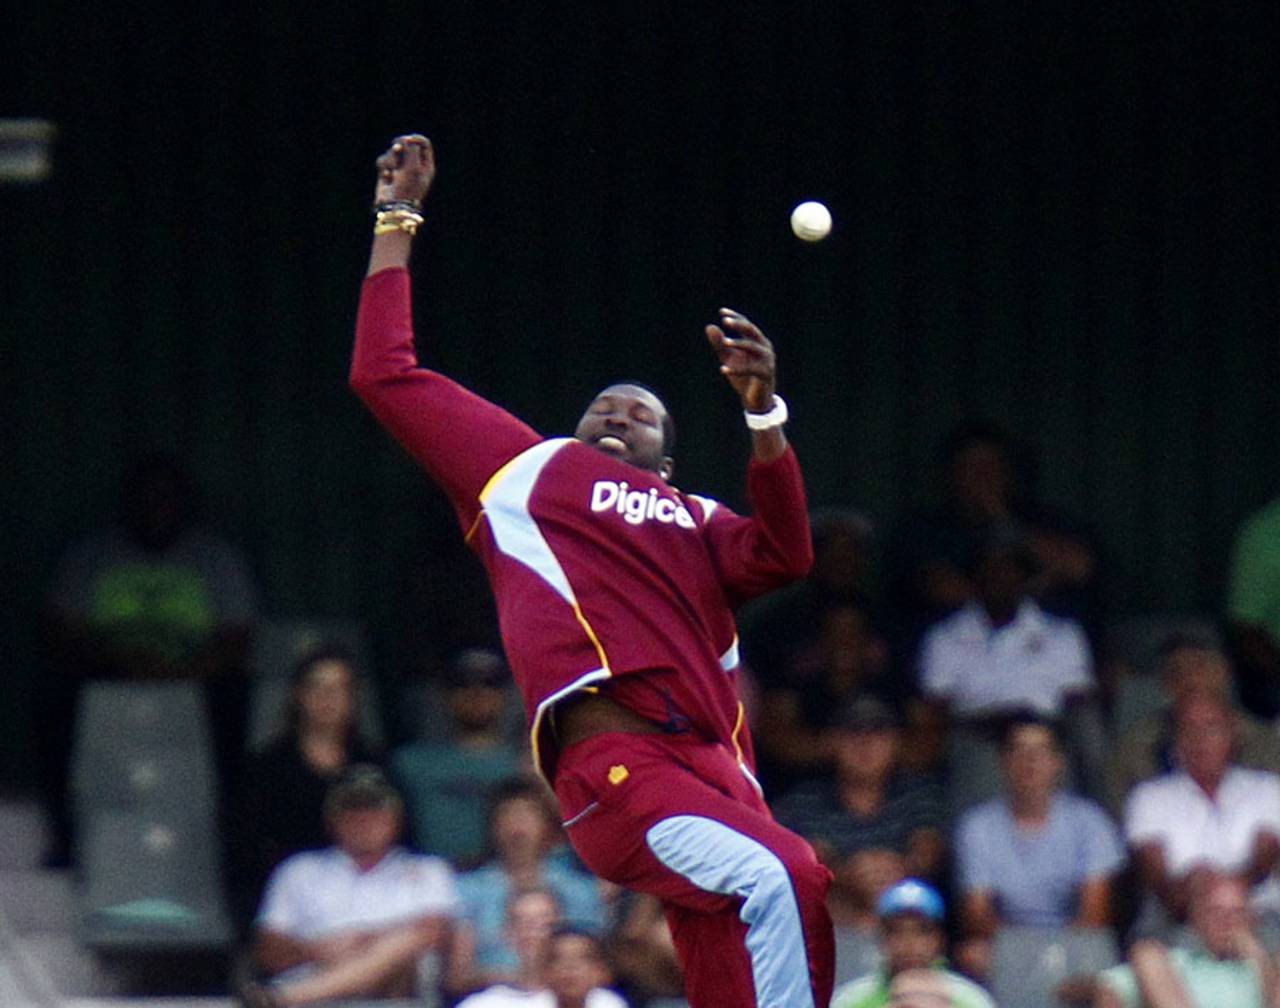 Poor in the field, too: Sulieman Benn missed a chance late on, South Africa v West Indies, 3rd ODI, East London, January 21, 2015